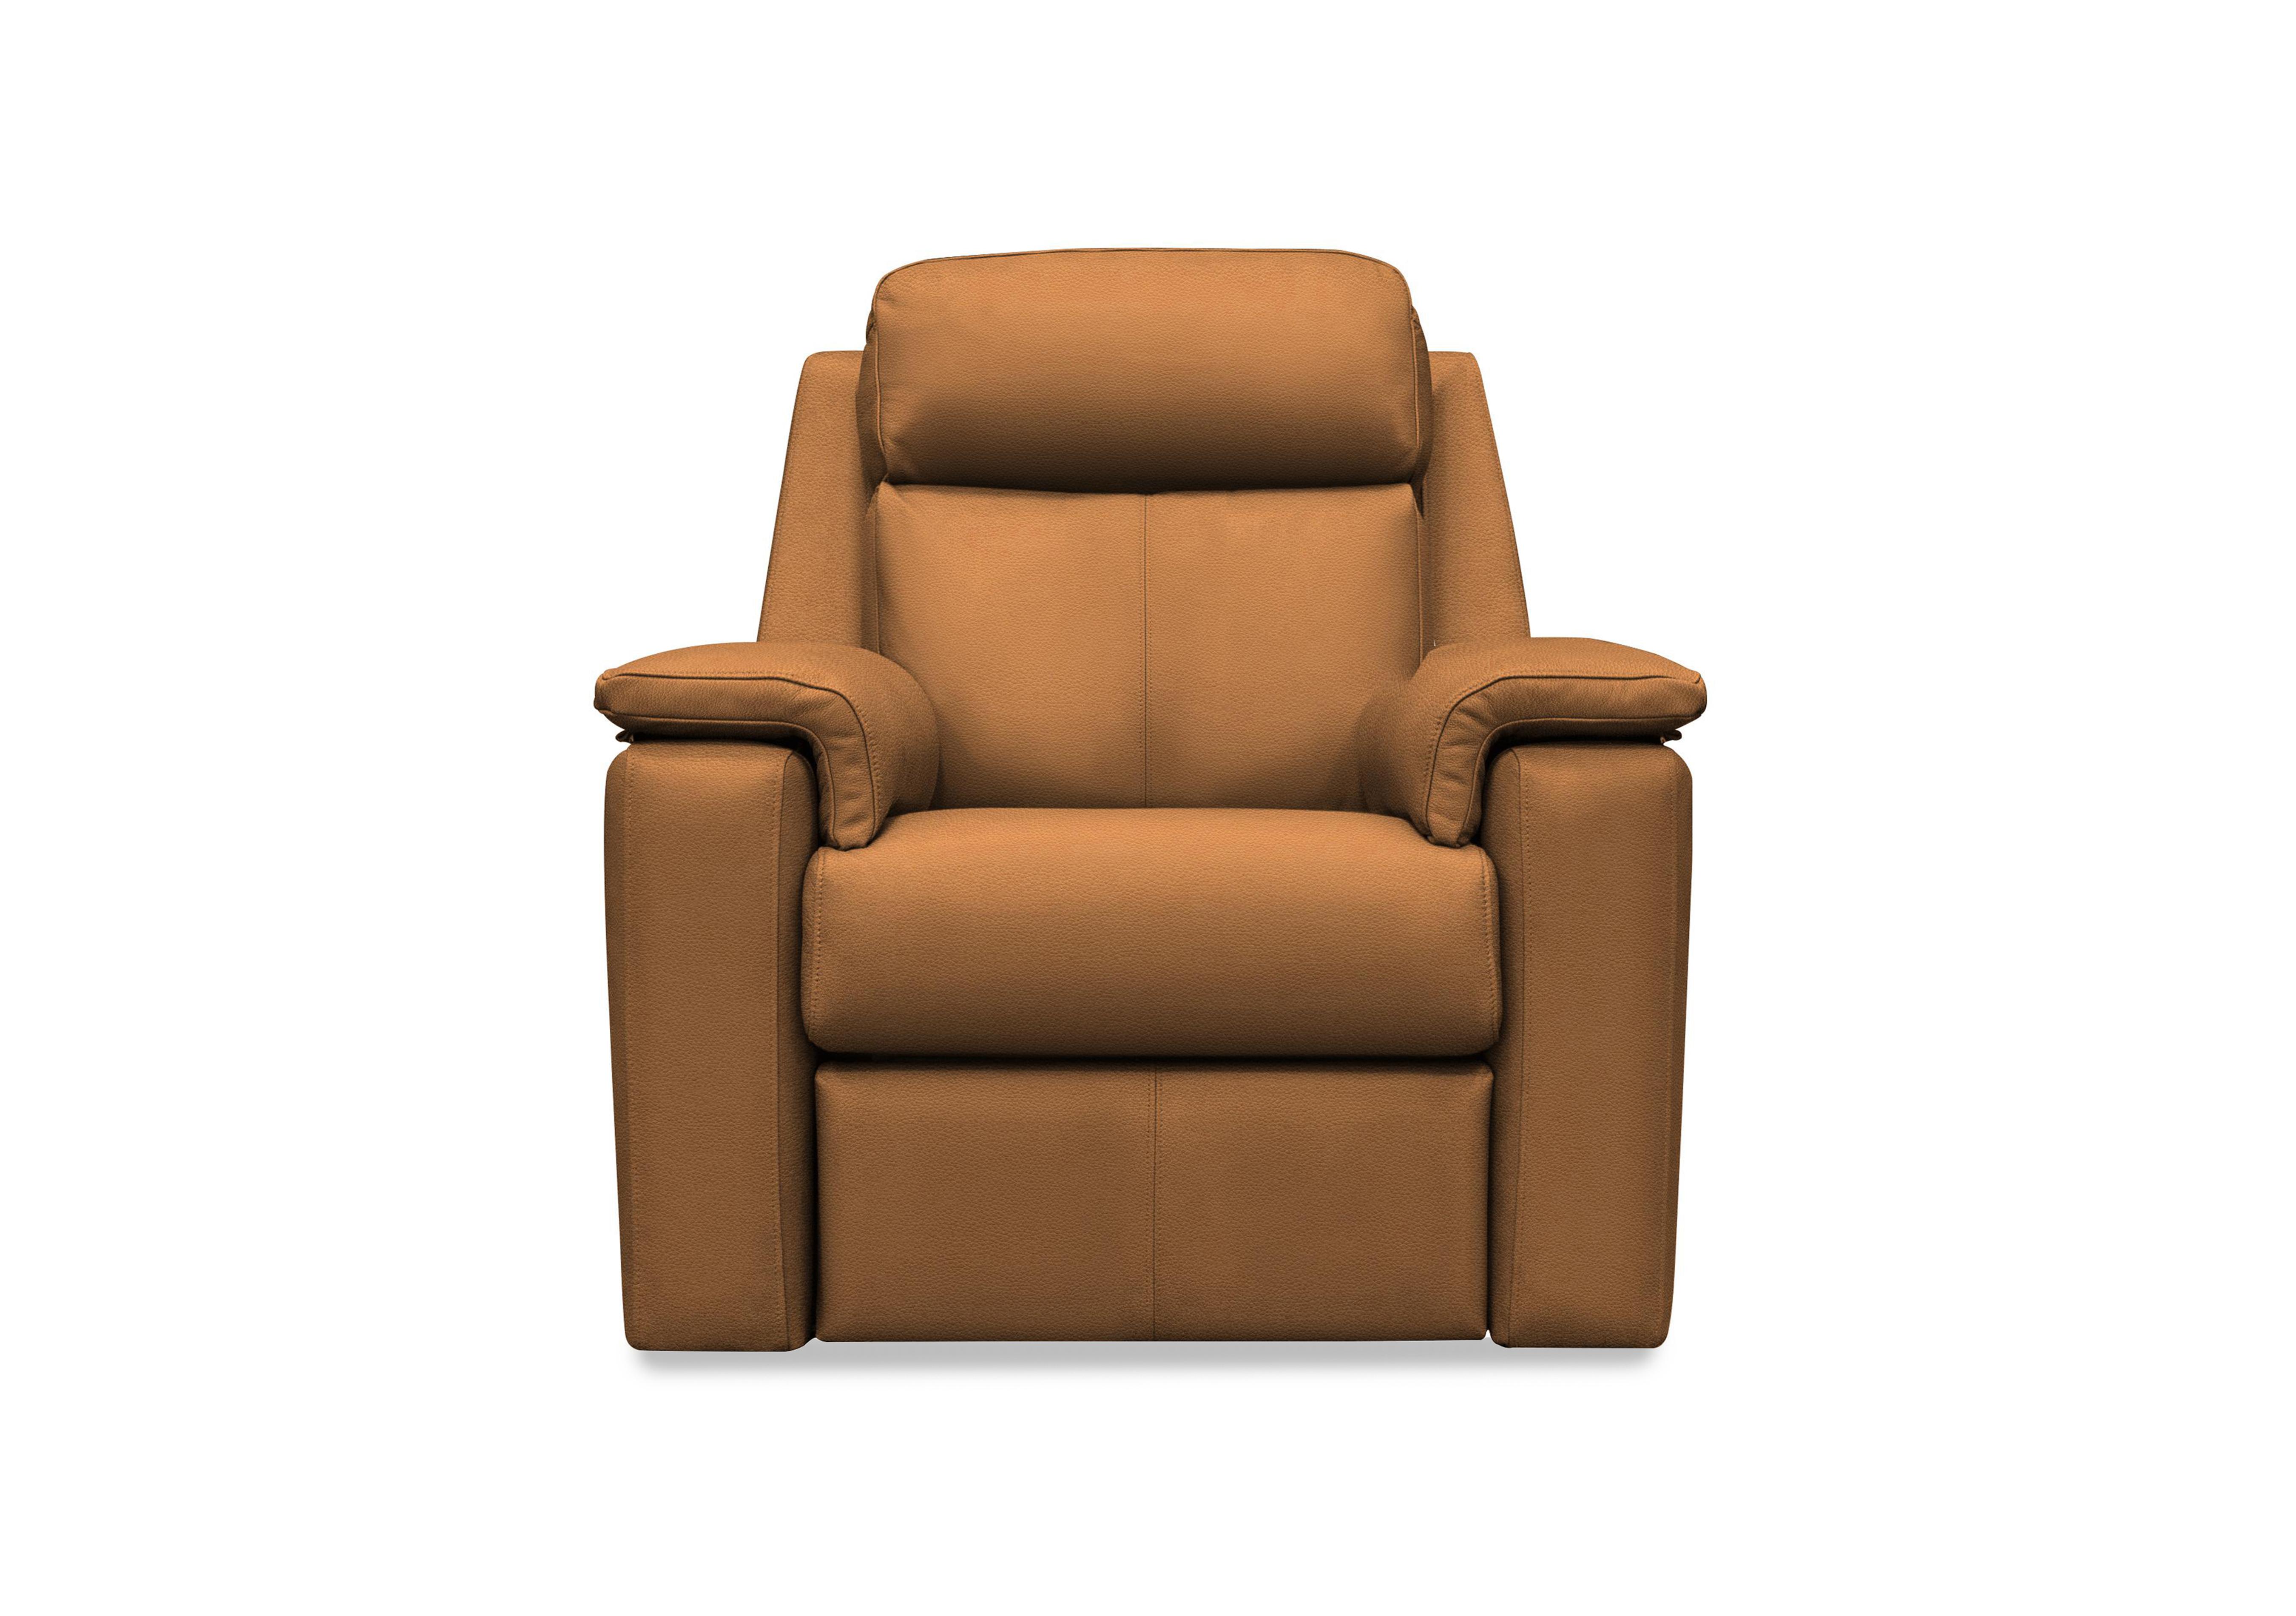 Thornbury Leather Power Recliner Chair with Power Headrest and Power Lumbar in L847 Cambridge Tan on Furniture Village